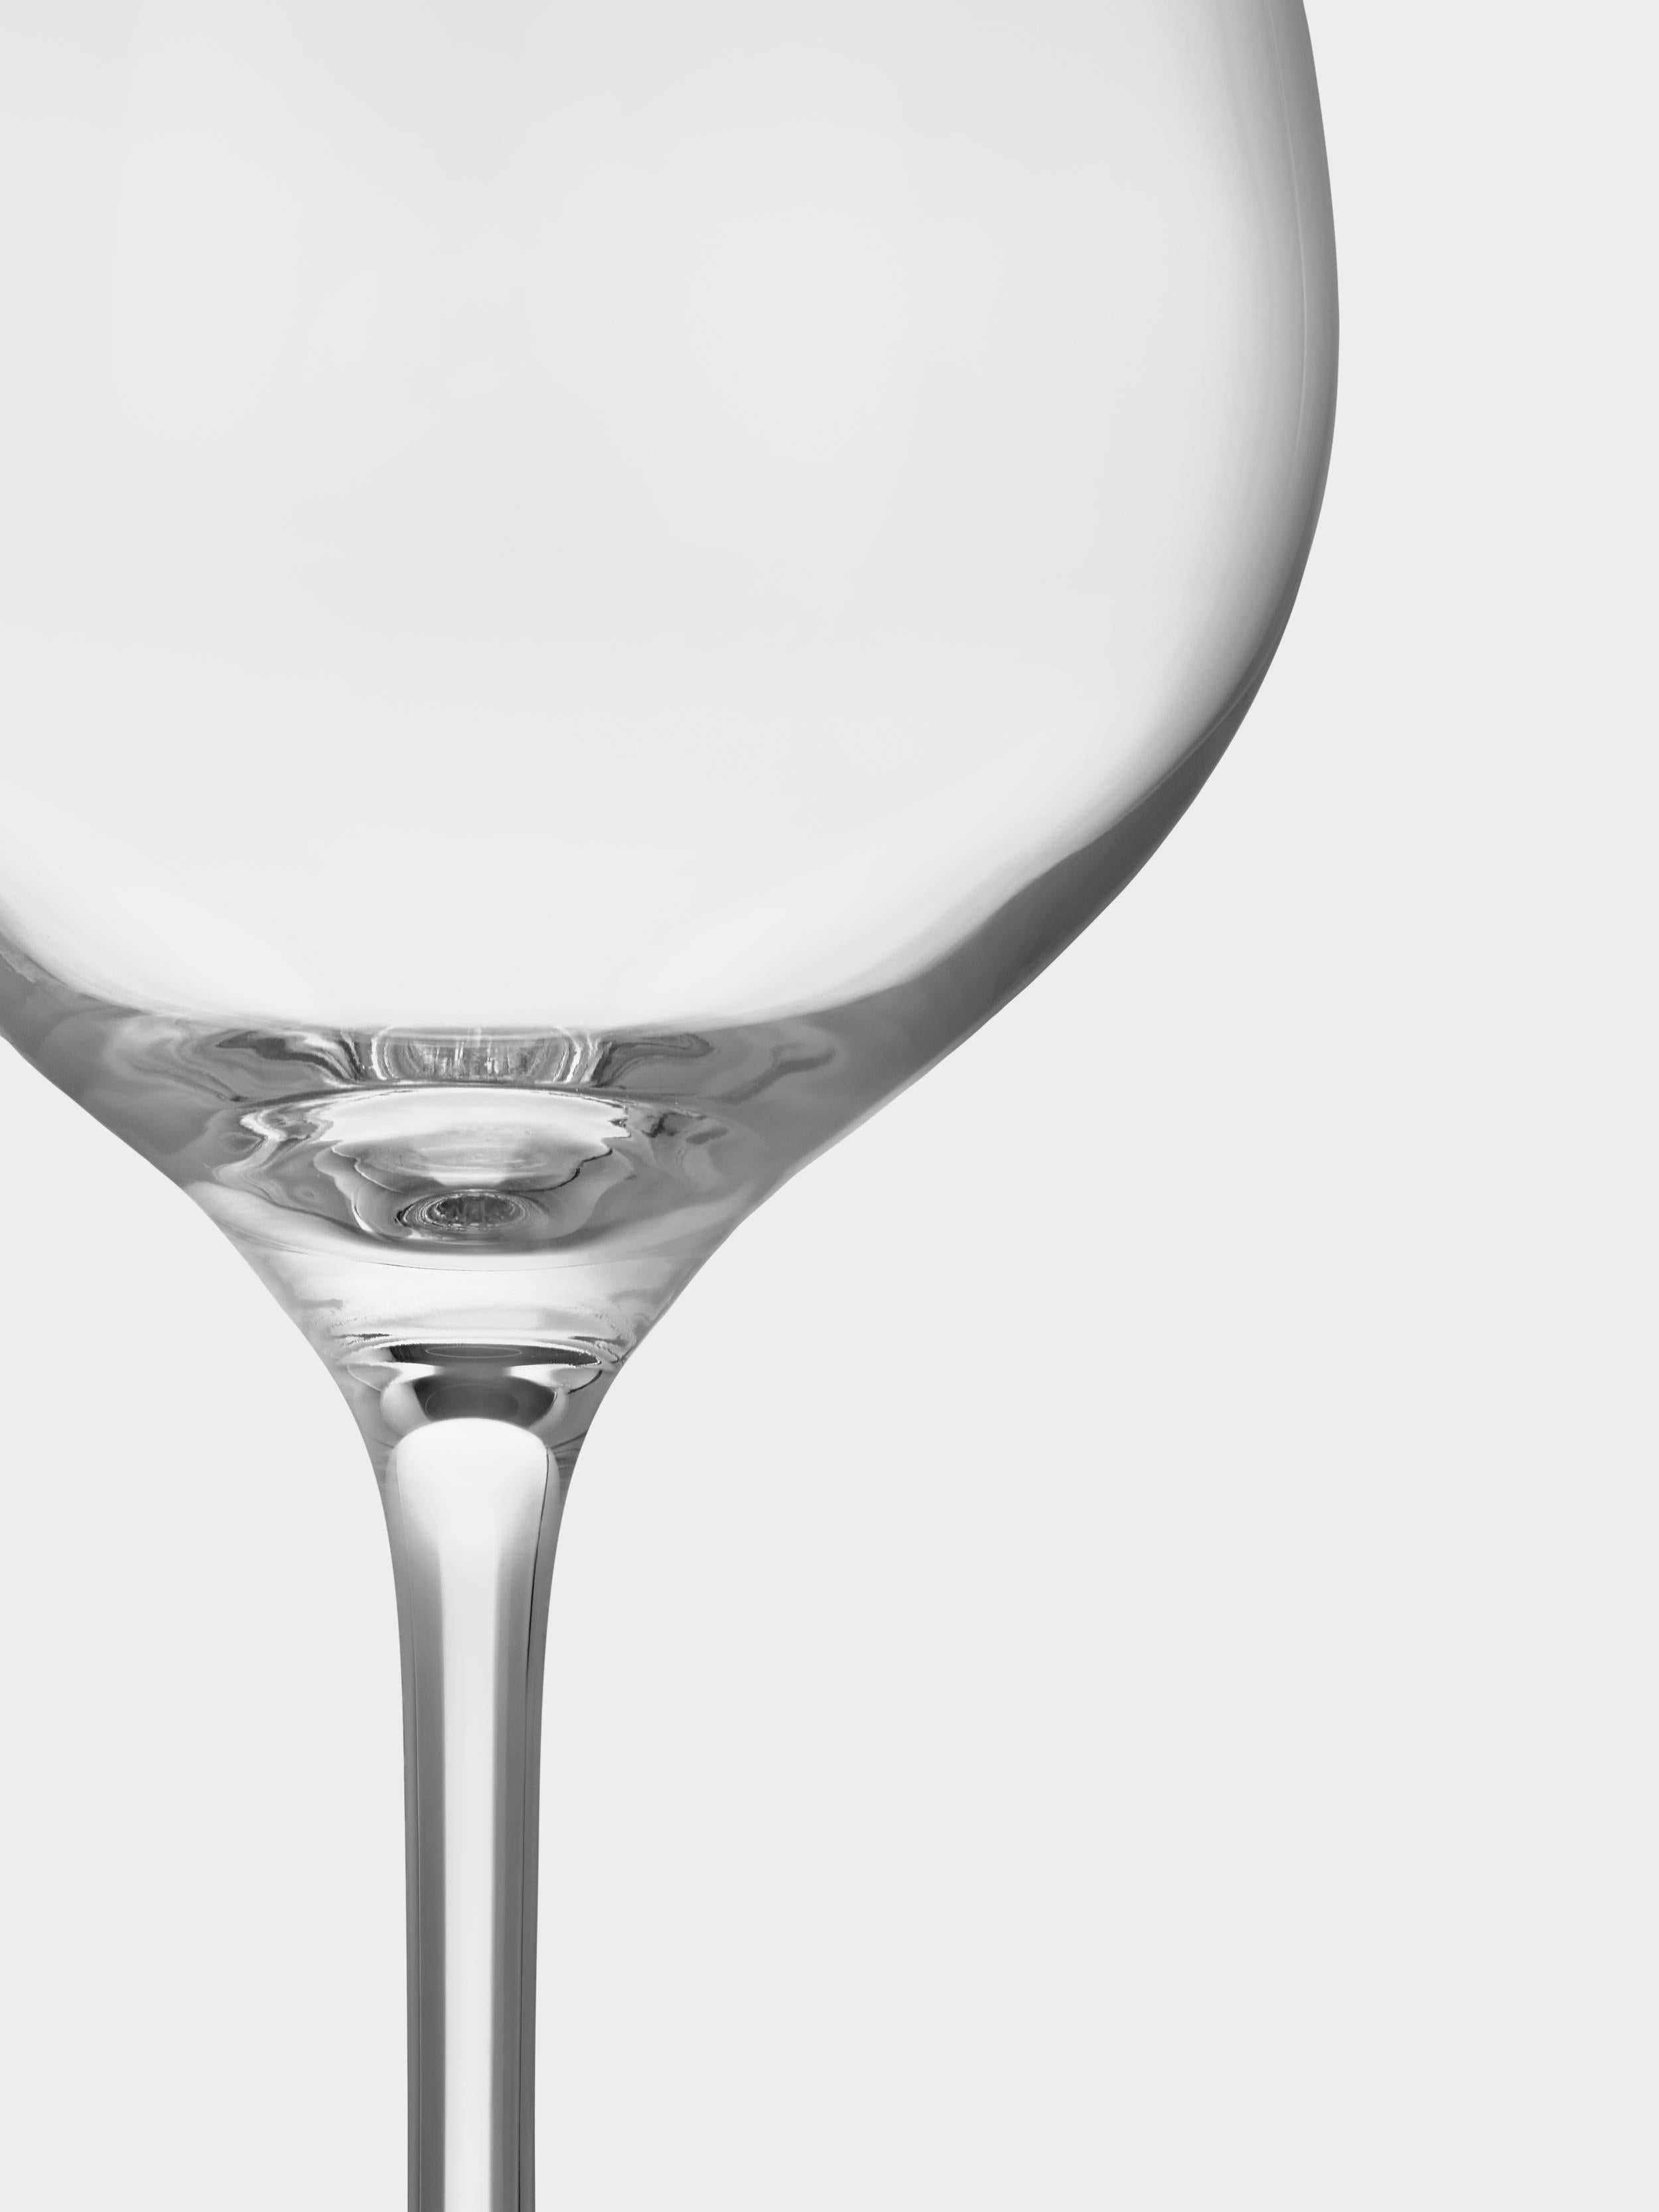 Gin and Tonic from Orrefors has a large, balloon-shaped bowl that holds 22 oz, which provides space for plenty of ice and garnishes, like rosemary or black pepper. The large surface of the bowl adds space for more bubbles allowing them to